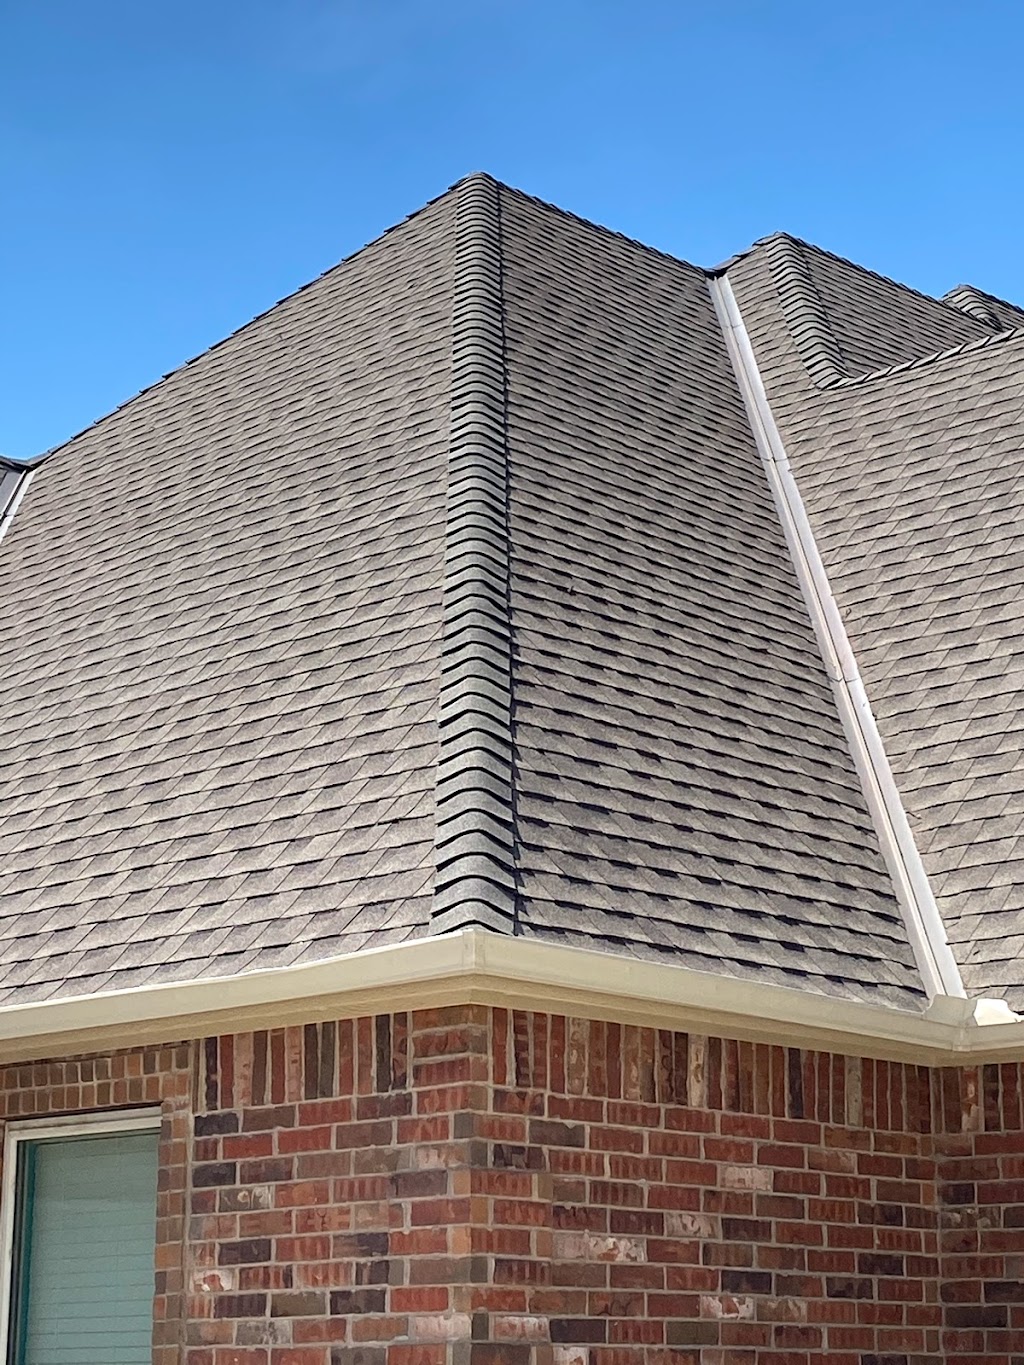 Lakeside Roofing and Construction | 47 W Armstrong Dr, Mustang, OK 73064 | Phone: (405) 823-8263